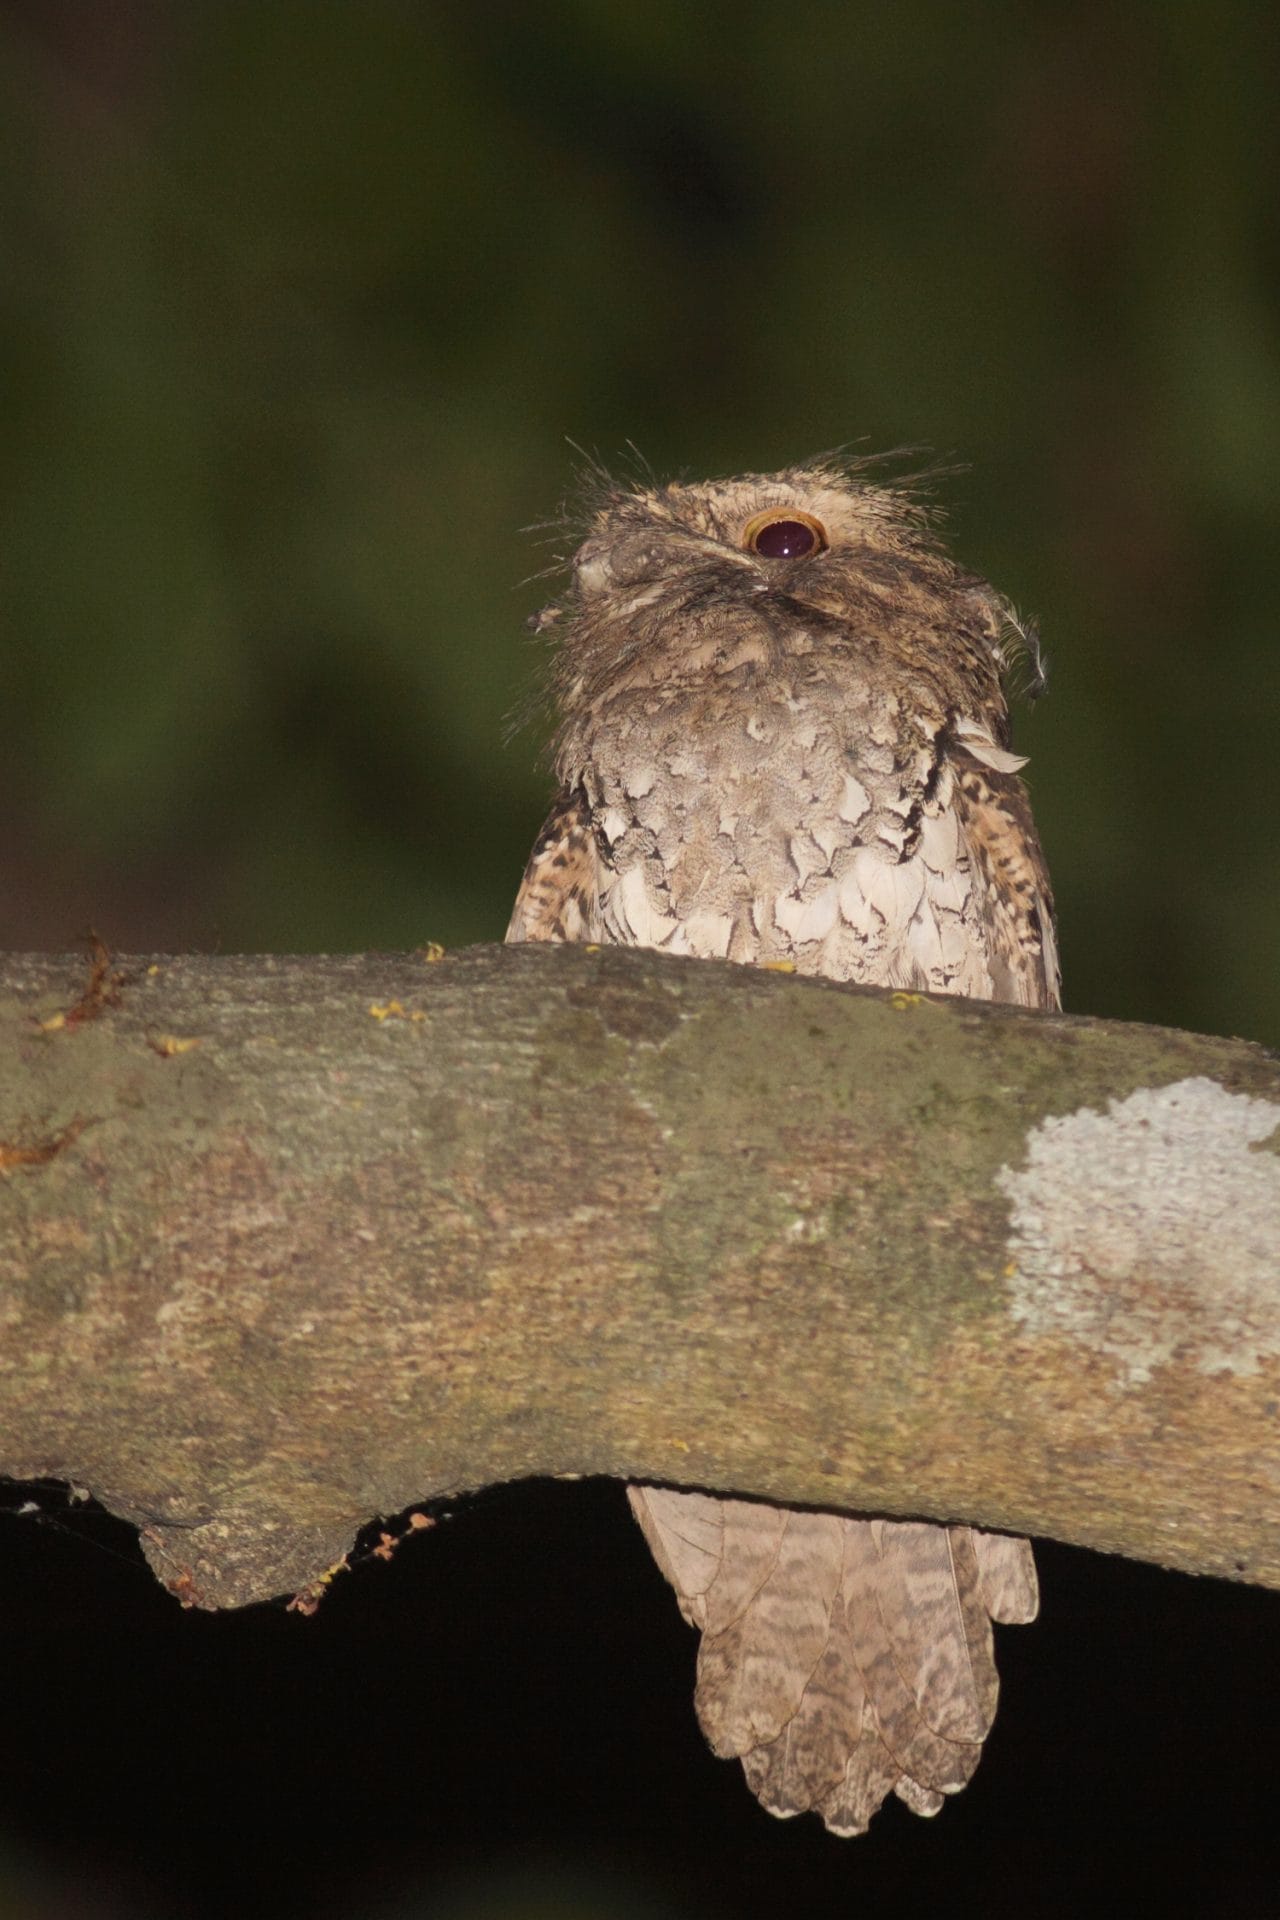 Finding this Philippine Frogmouth sitting silently on a low perch was a special bonus.